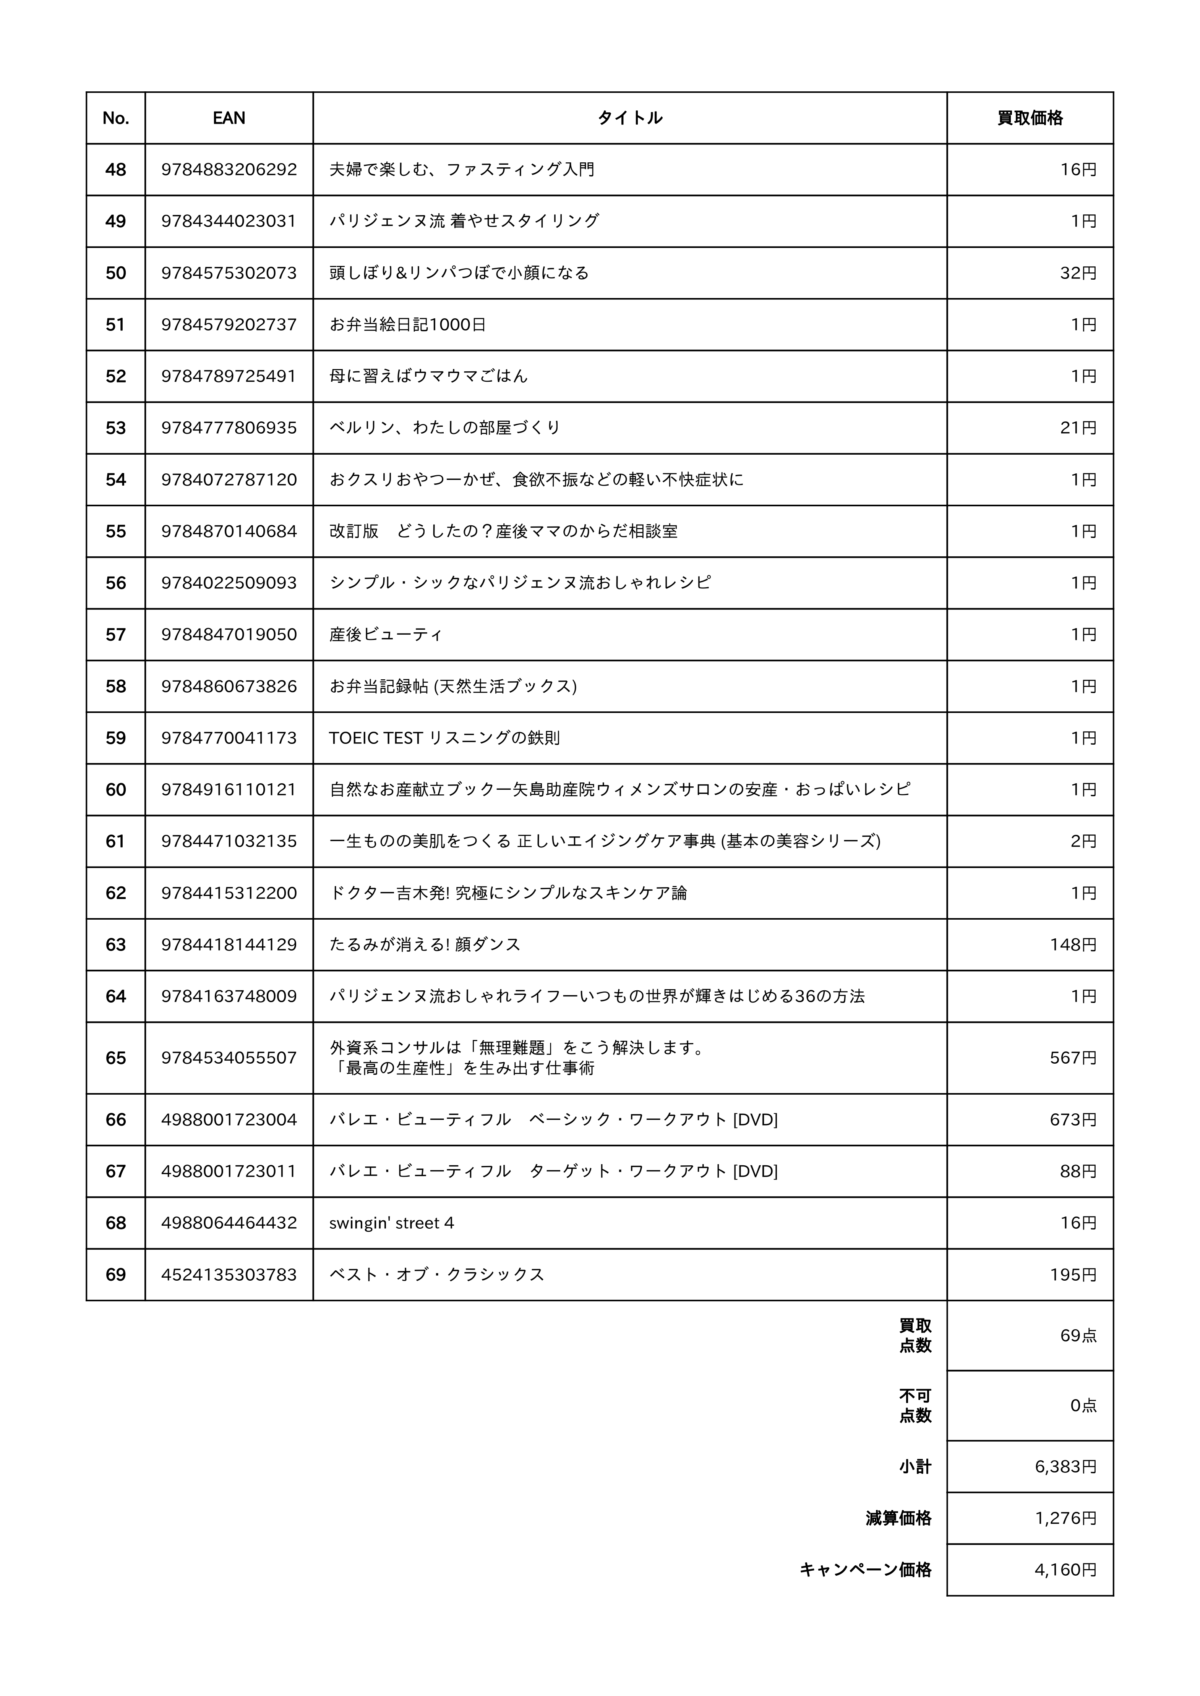 BUY王の査定結果明細 書籍 その3